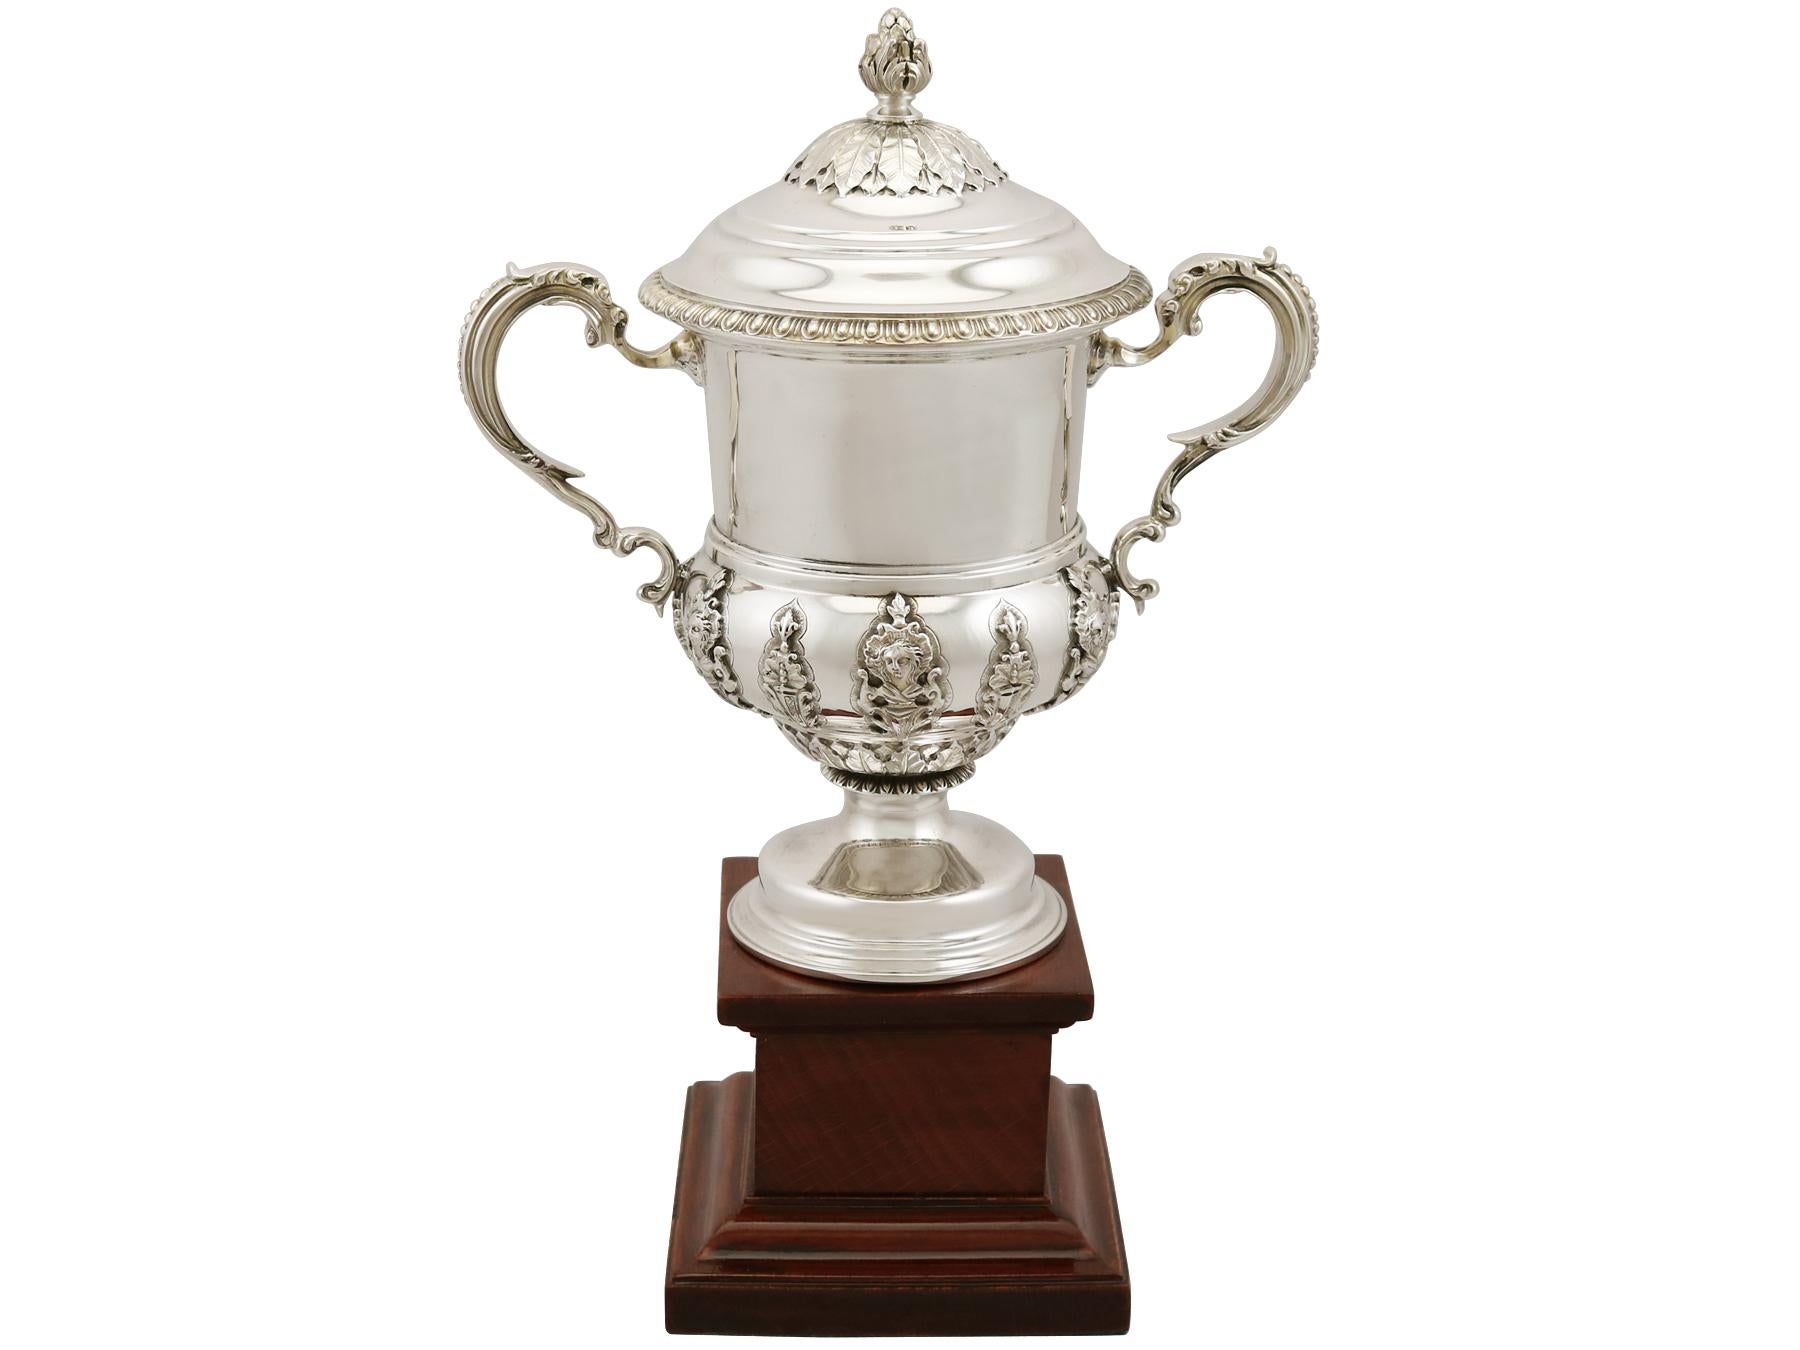 Regency Antique George V Sterling Silver Presentation Cup and Cover (1932)